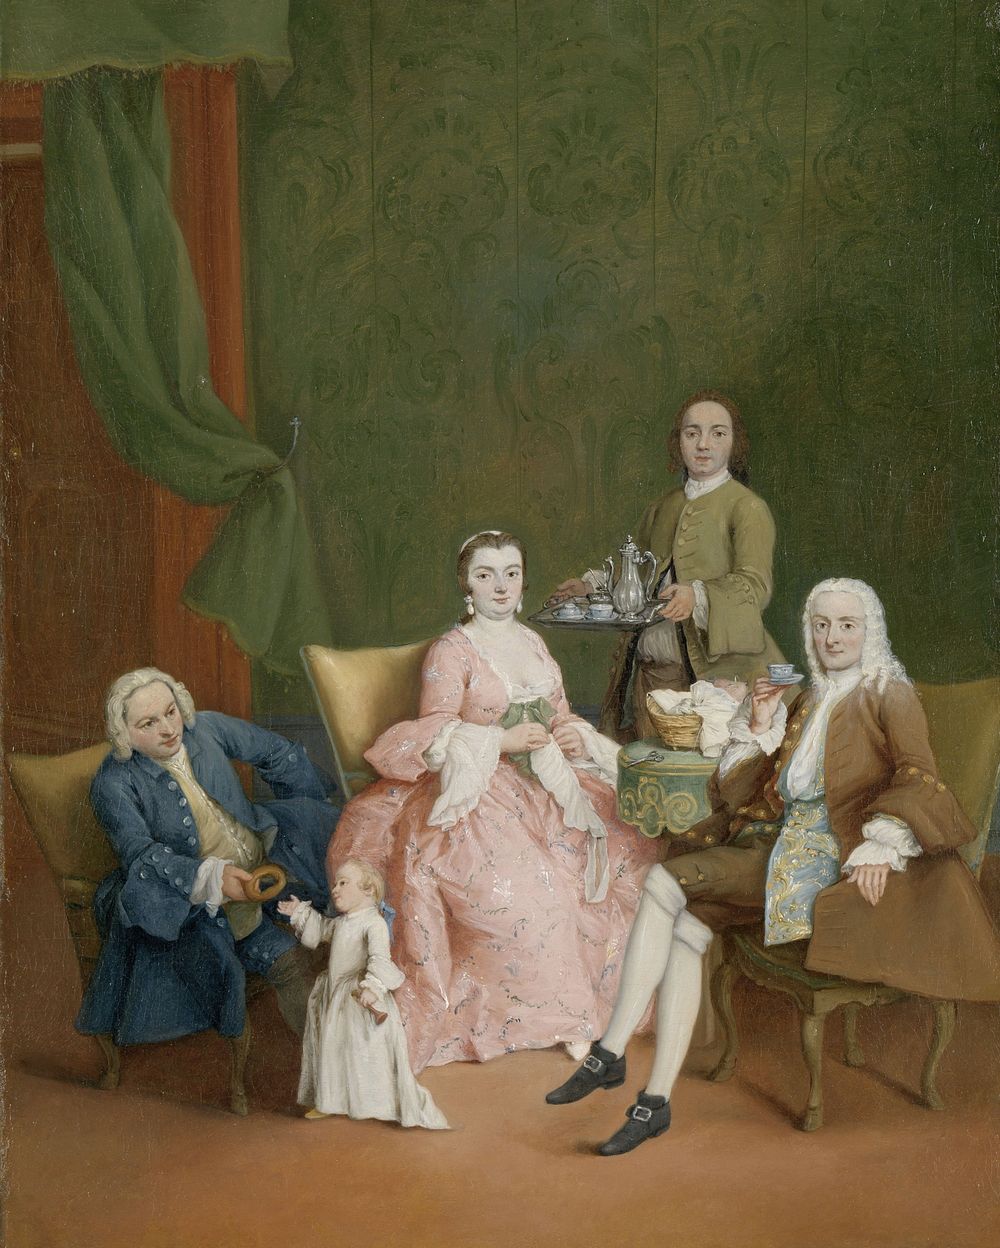 Portrait of a Venetian Family with a Manservant Serving Coffee (c. 1752) by Pietro Longhi